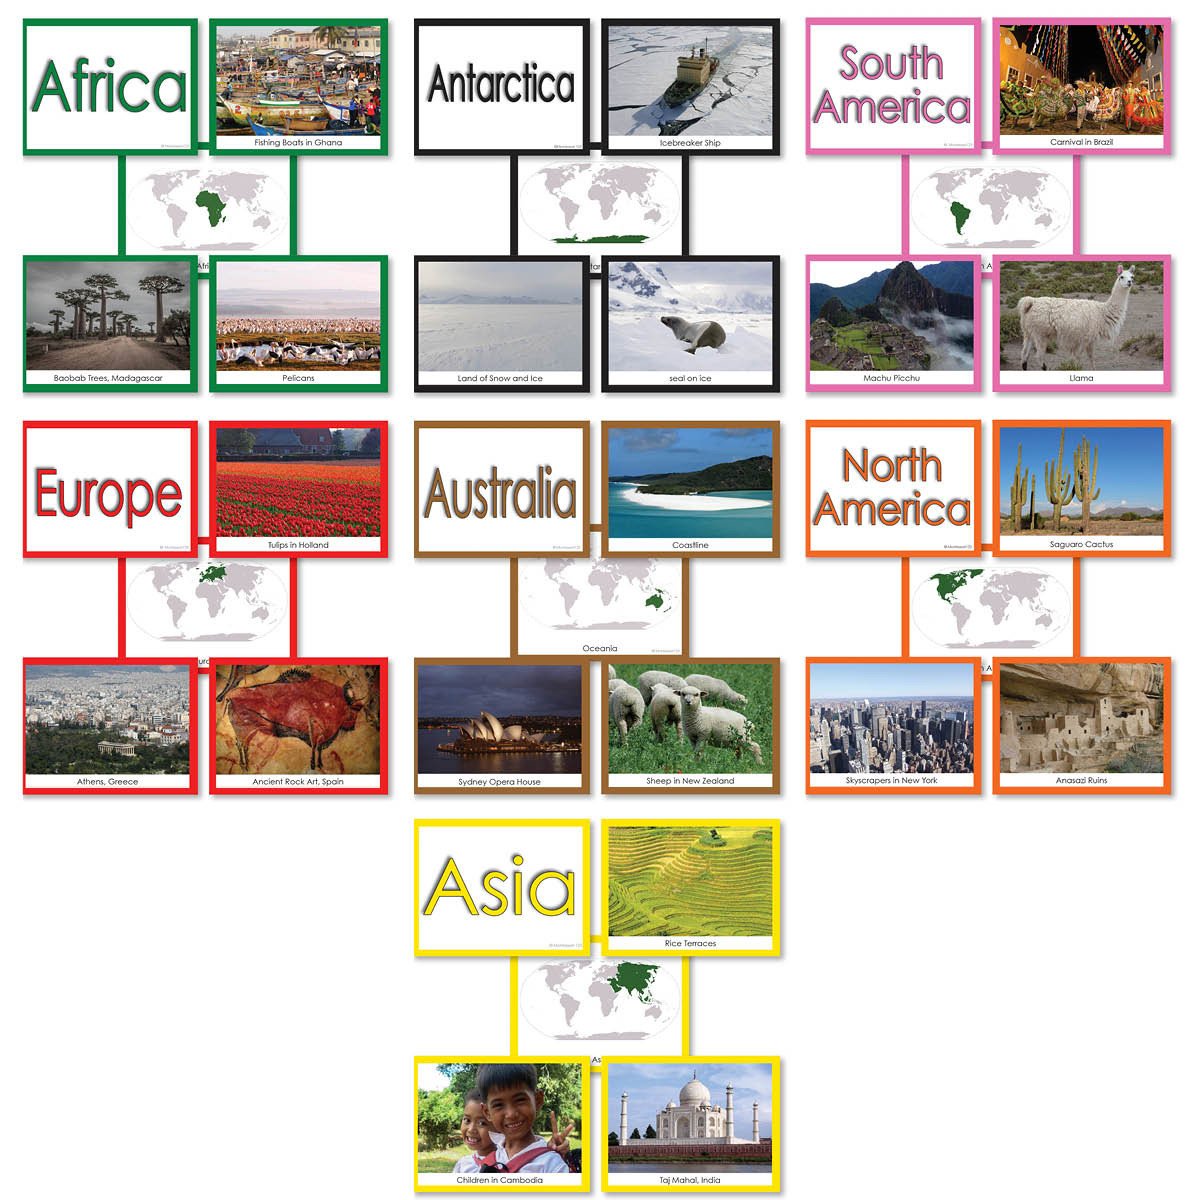 Geography Material-Study Of World Geography - Complete Set Of Image Folders For All Continents